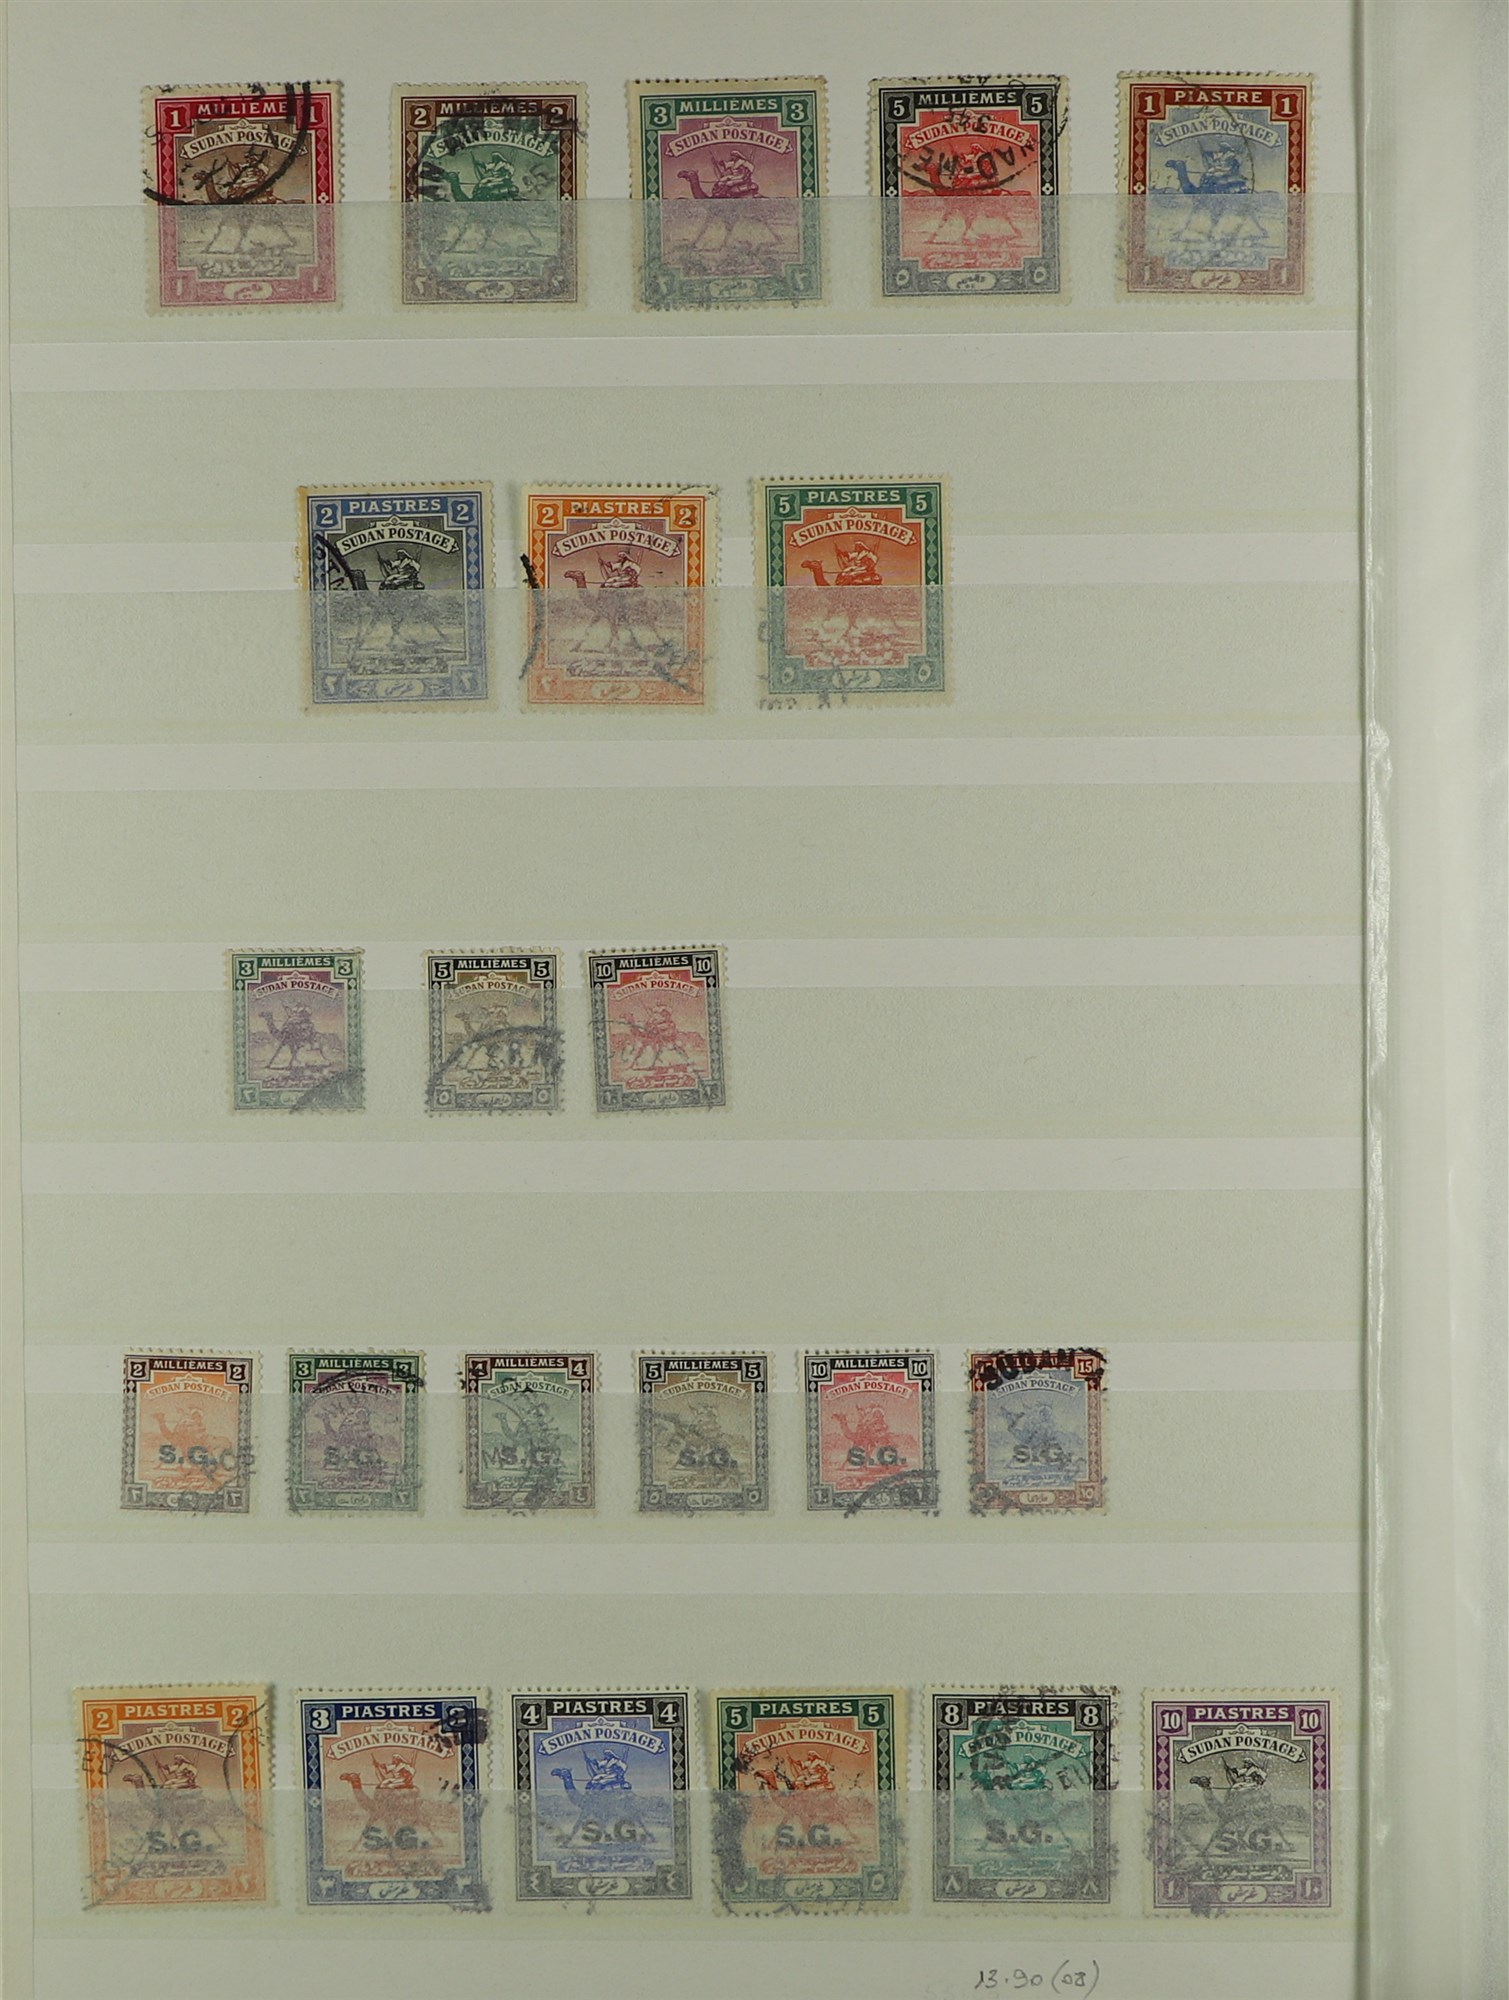 SUDAN 1897 - 1961 USED COLLECTION of 220+ stamps on protective pages, 1897 set to 5pi, 1898 set, - Image 8 of 10